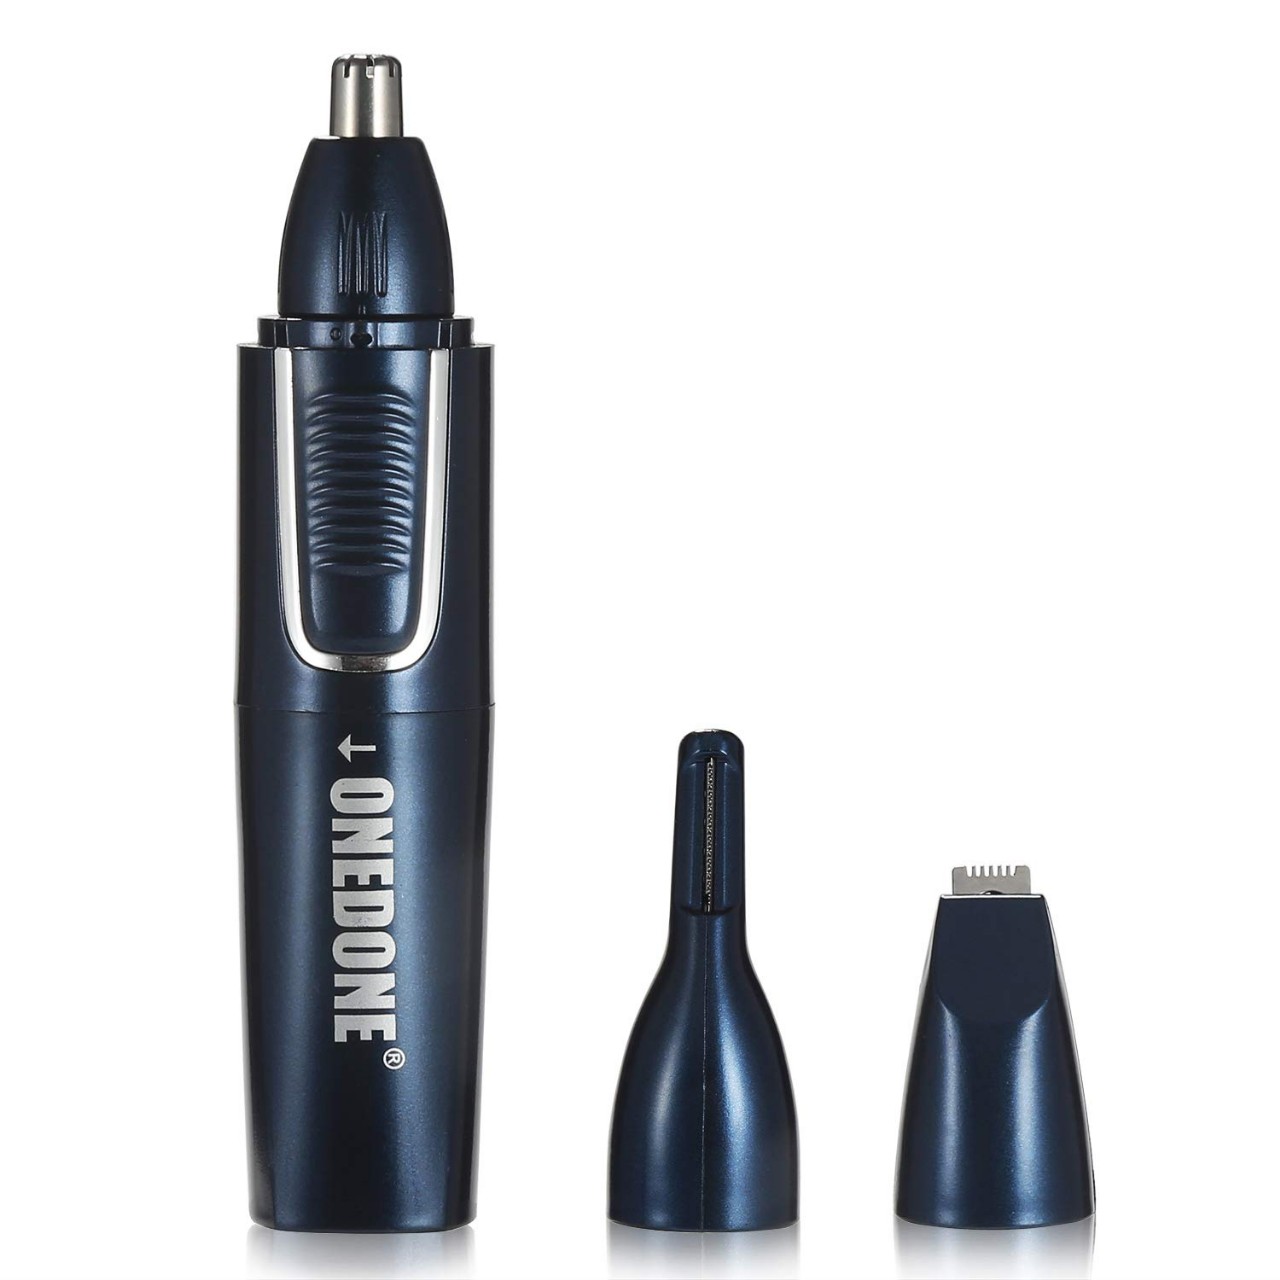 ONEDONE Nose Hair Trimmer for Men 3 in 1 USB Rechargeable Men Women Ear Nose Trimmer Painless